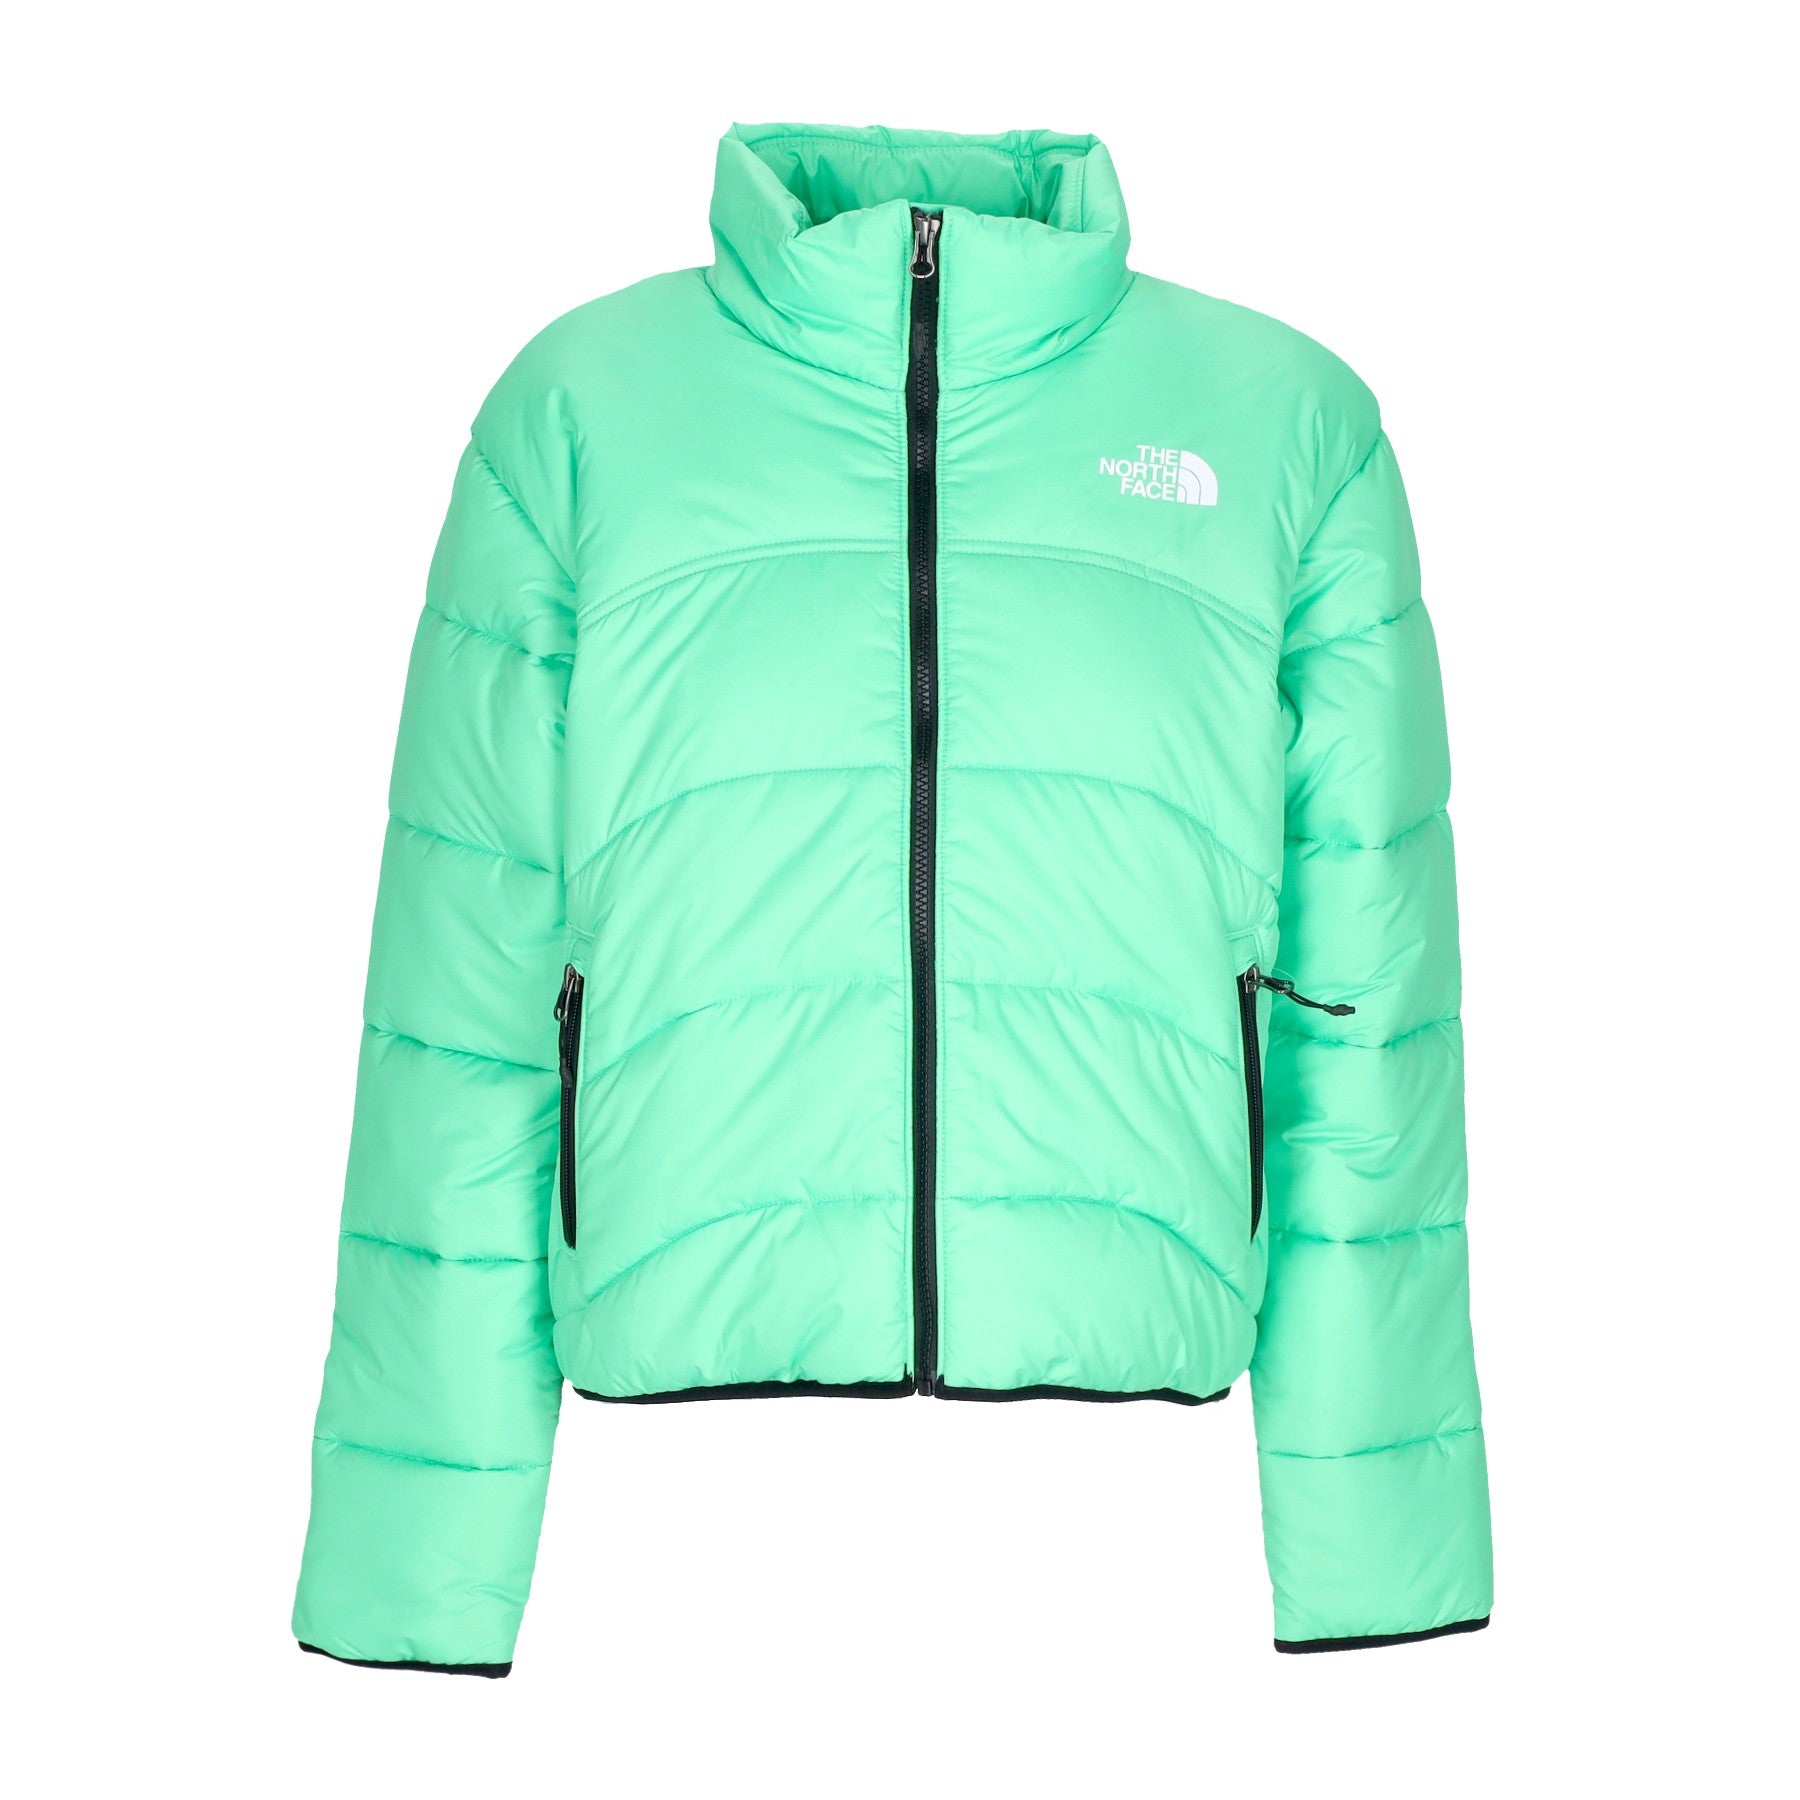 The North Face, Piumino Donna W Jacket 2000, Chlorophyll Green